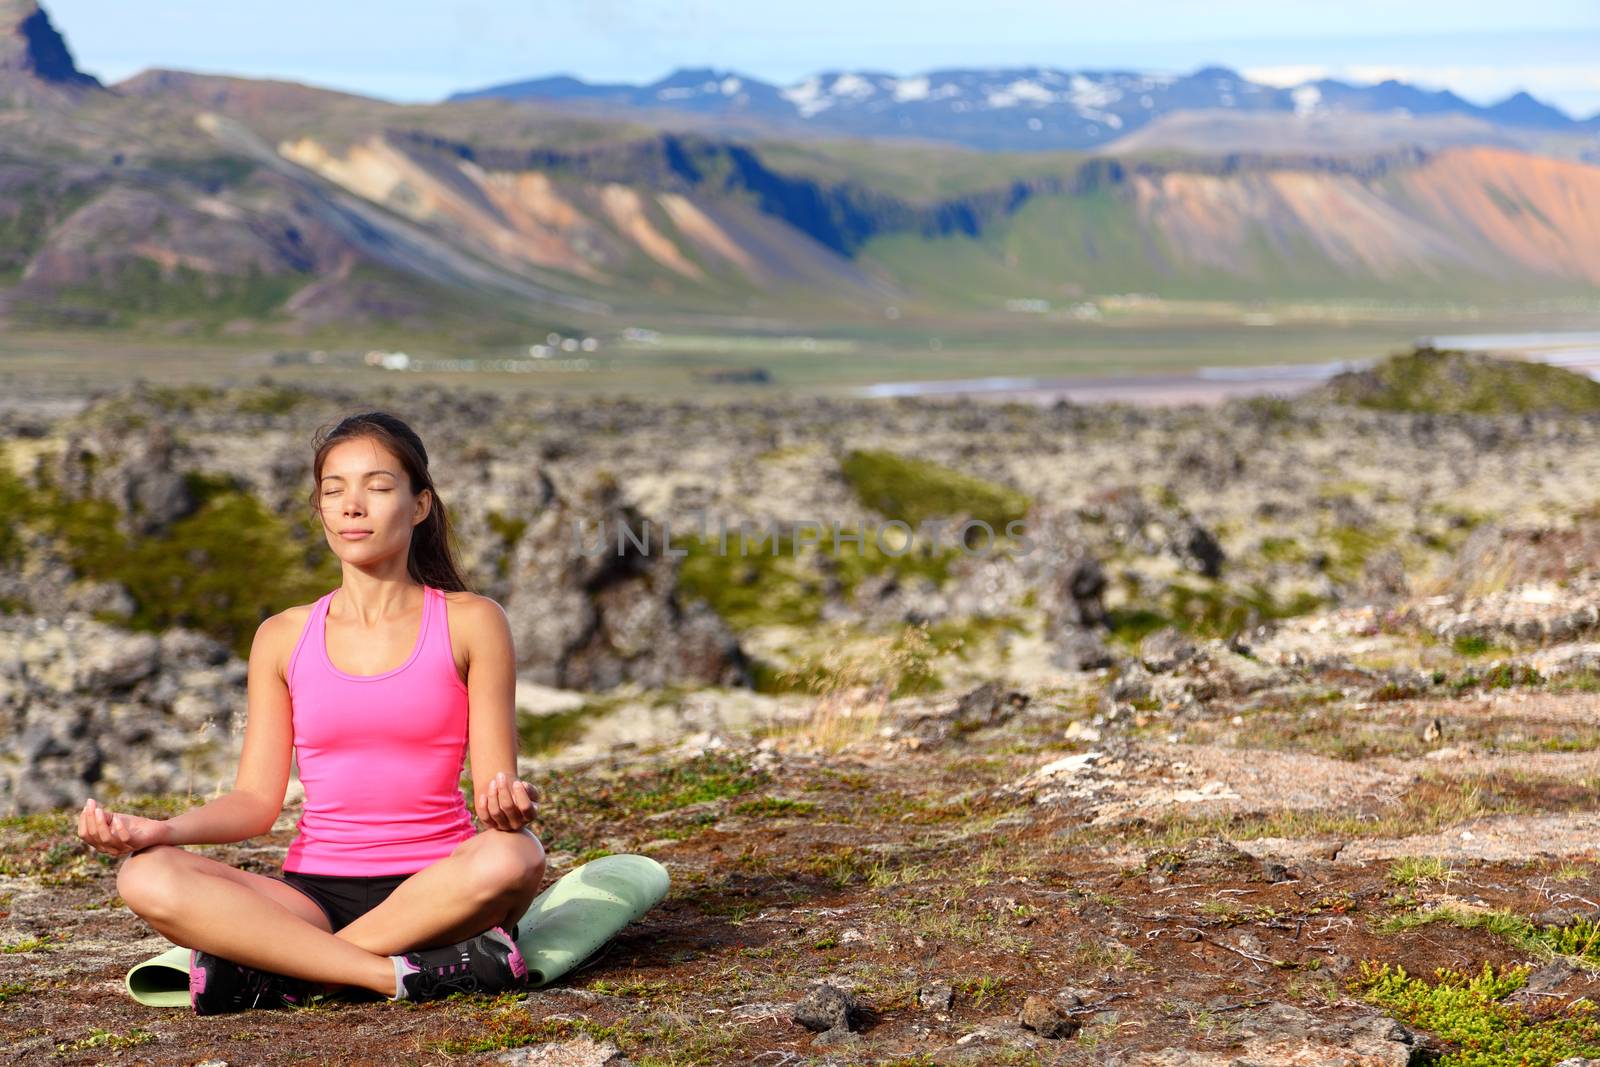 Meditating yoga woman in meditation in nature. Female model relaxing in serene harmony in lotus position pose. Healthy wellness lifestyle image with multicultural young woman. Image from Iceland.